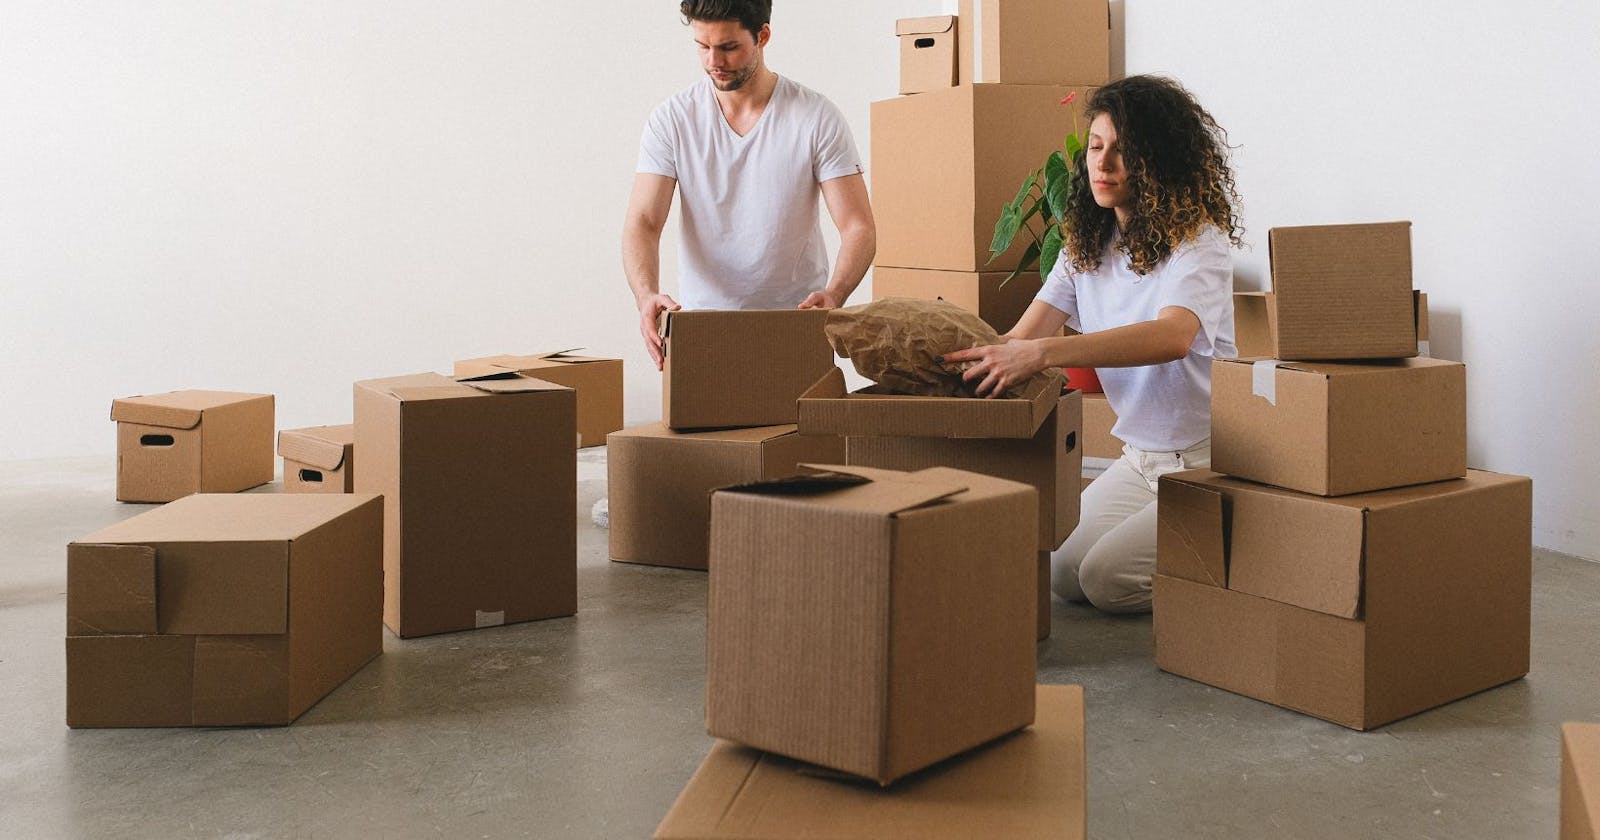 How do I choose packers and movers in Noida?